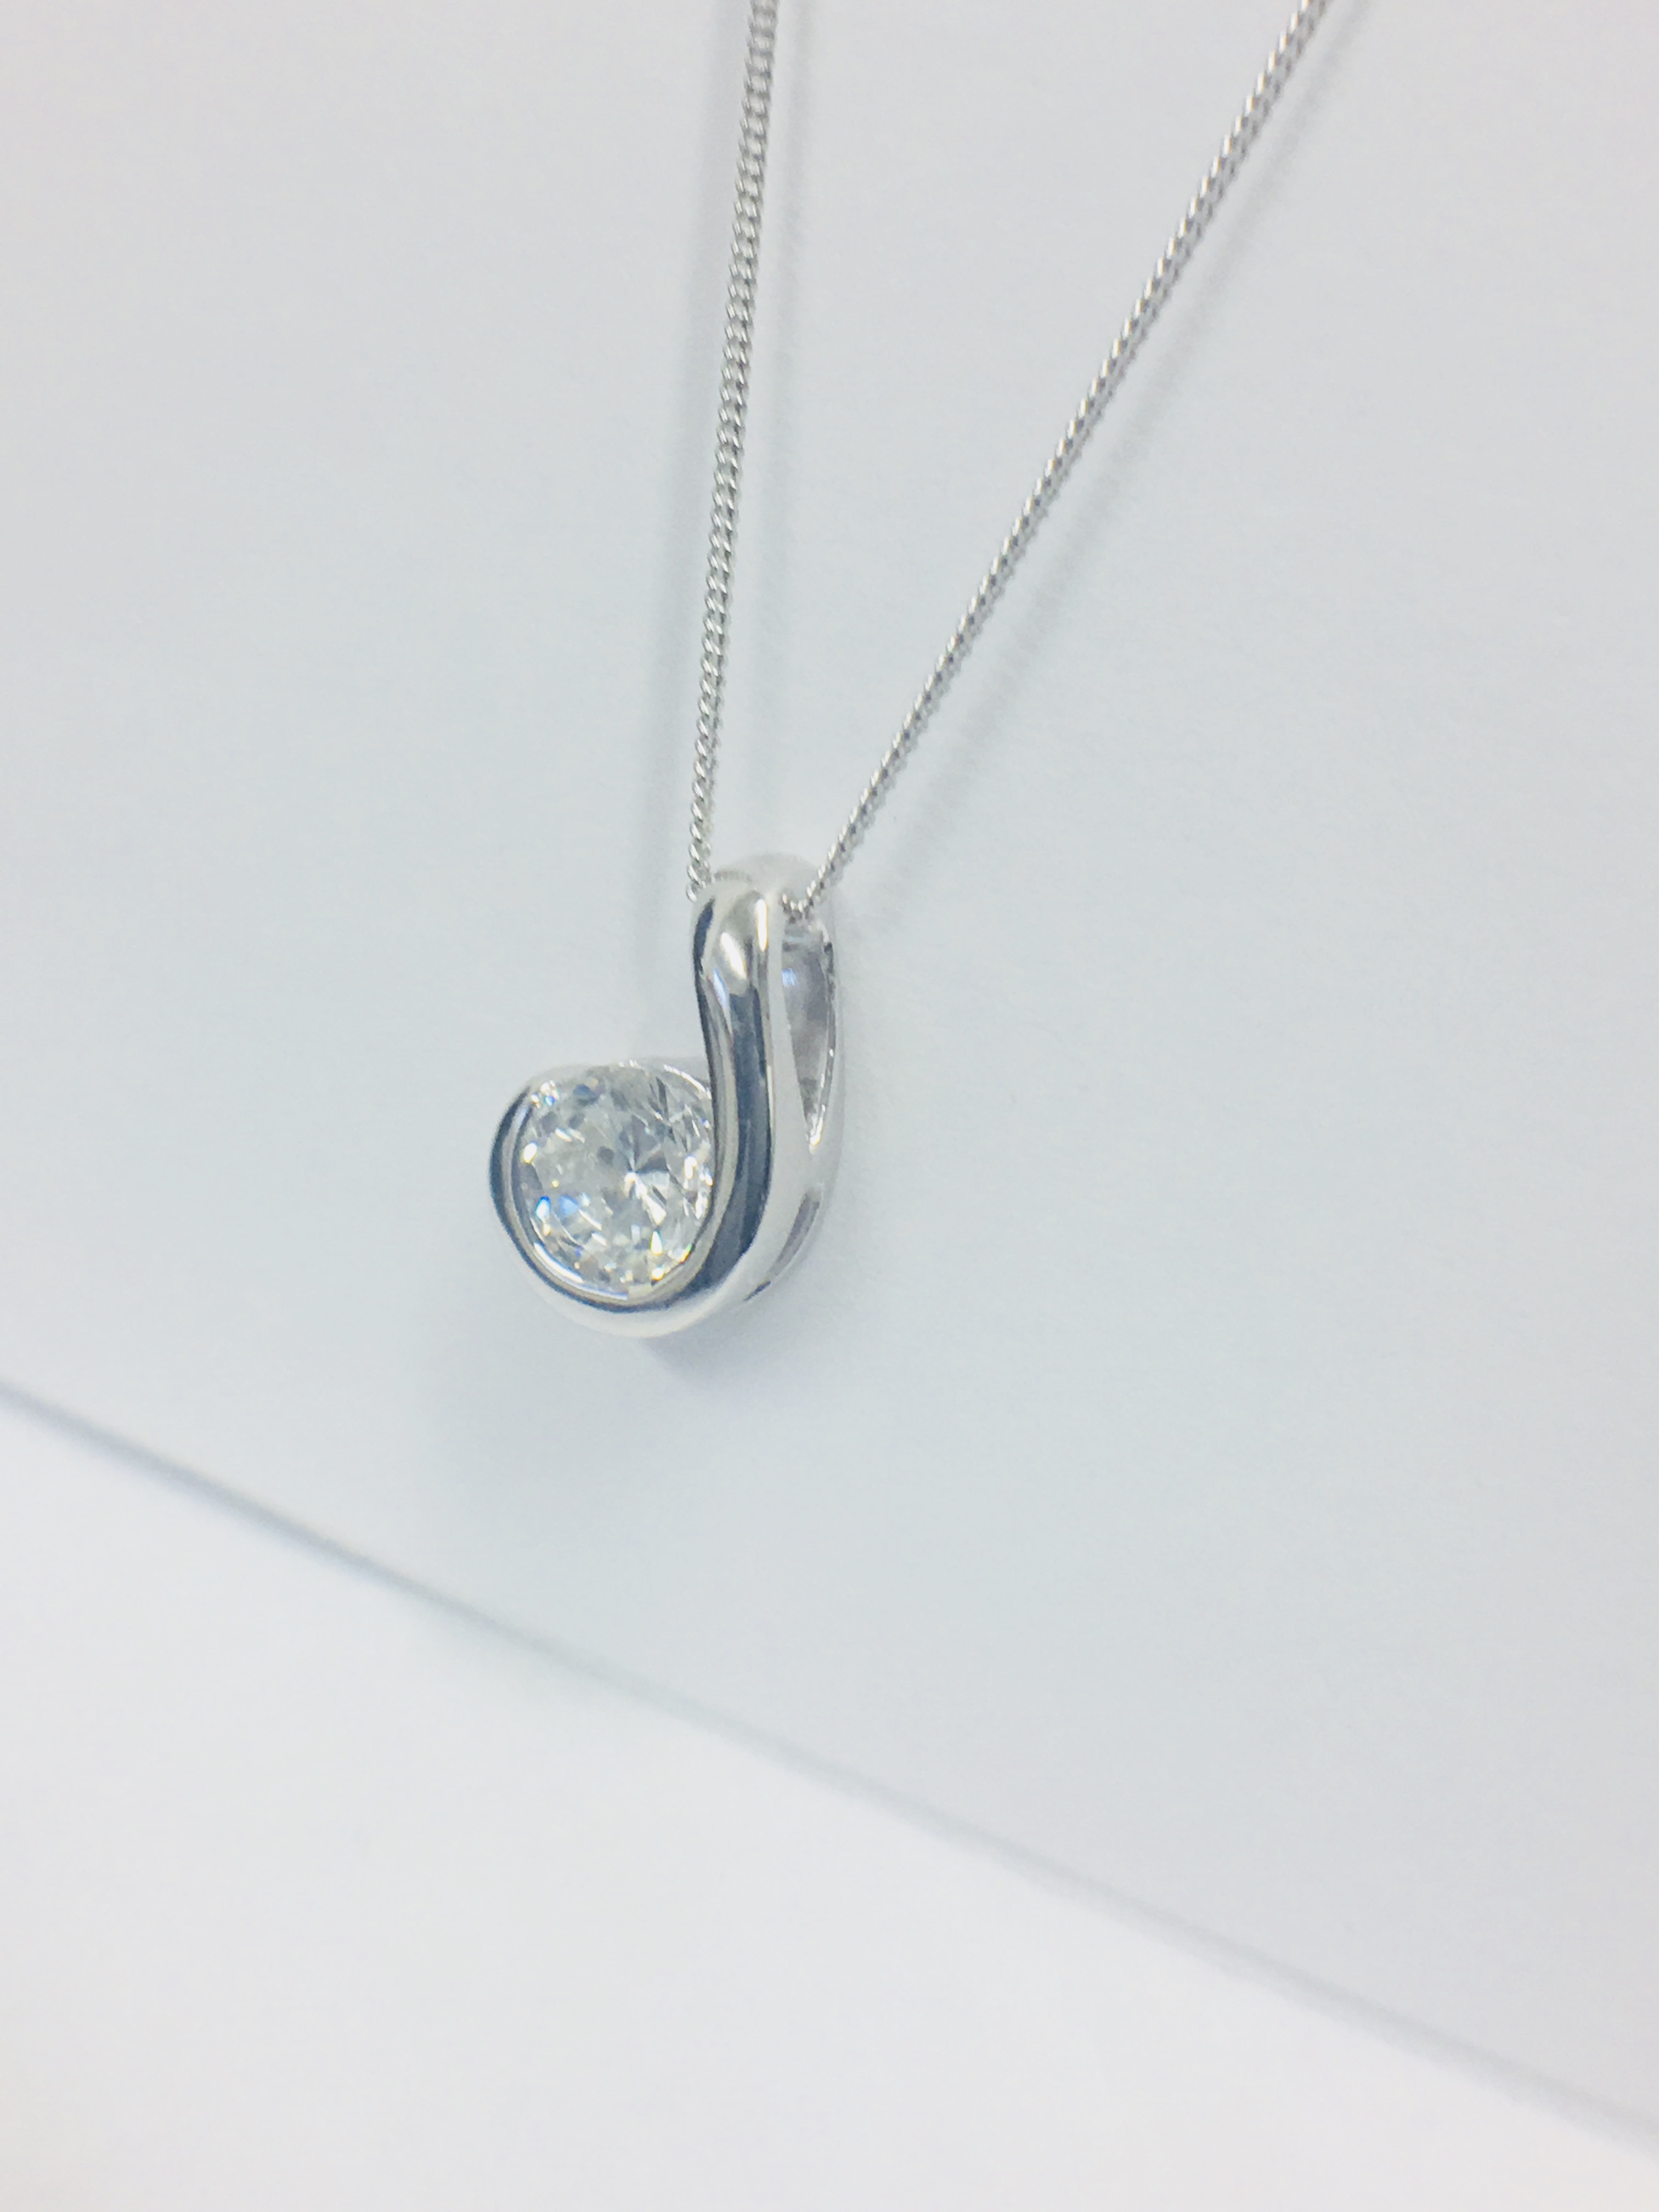 Platinum Diamond Pendant And 9Ct White Gold Necklace, - Image 3 of 5